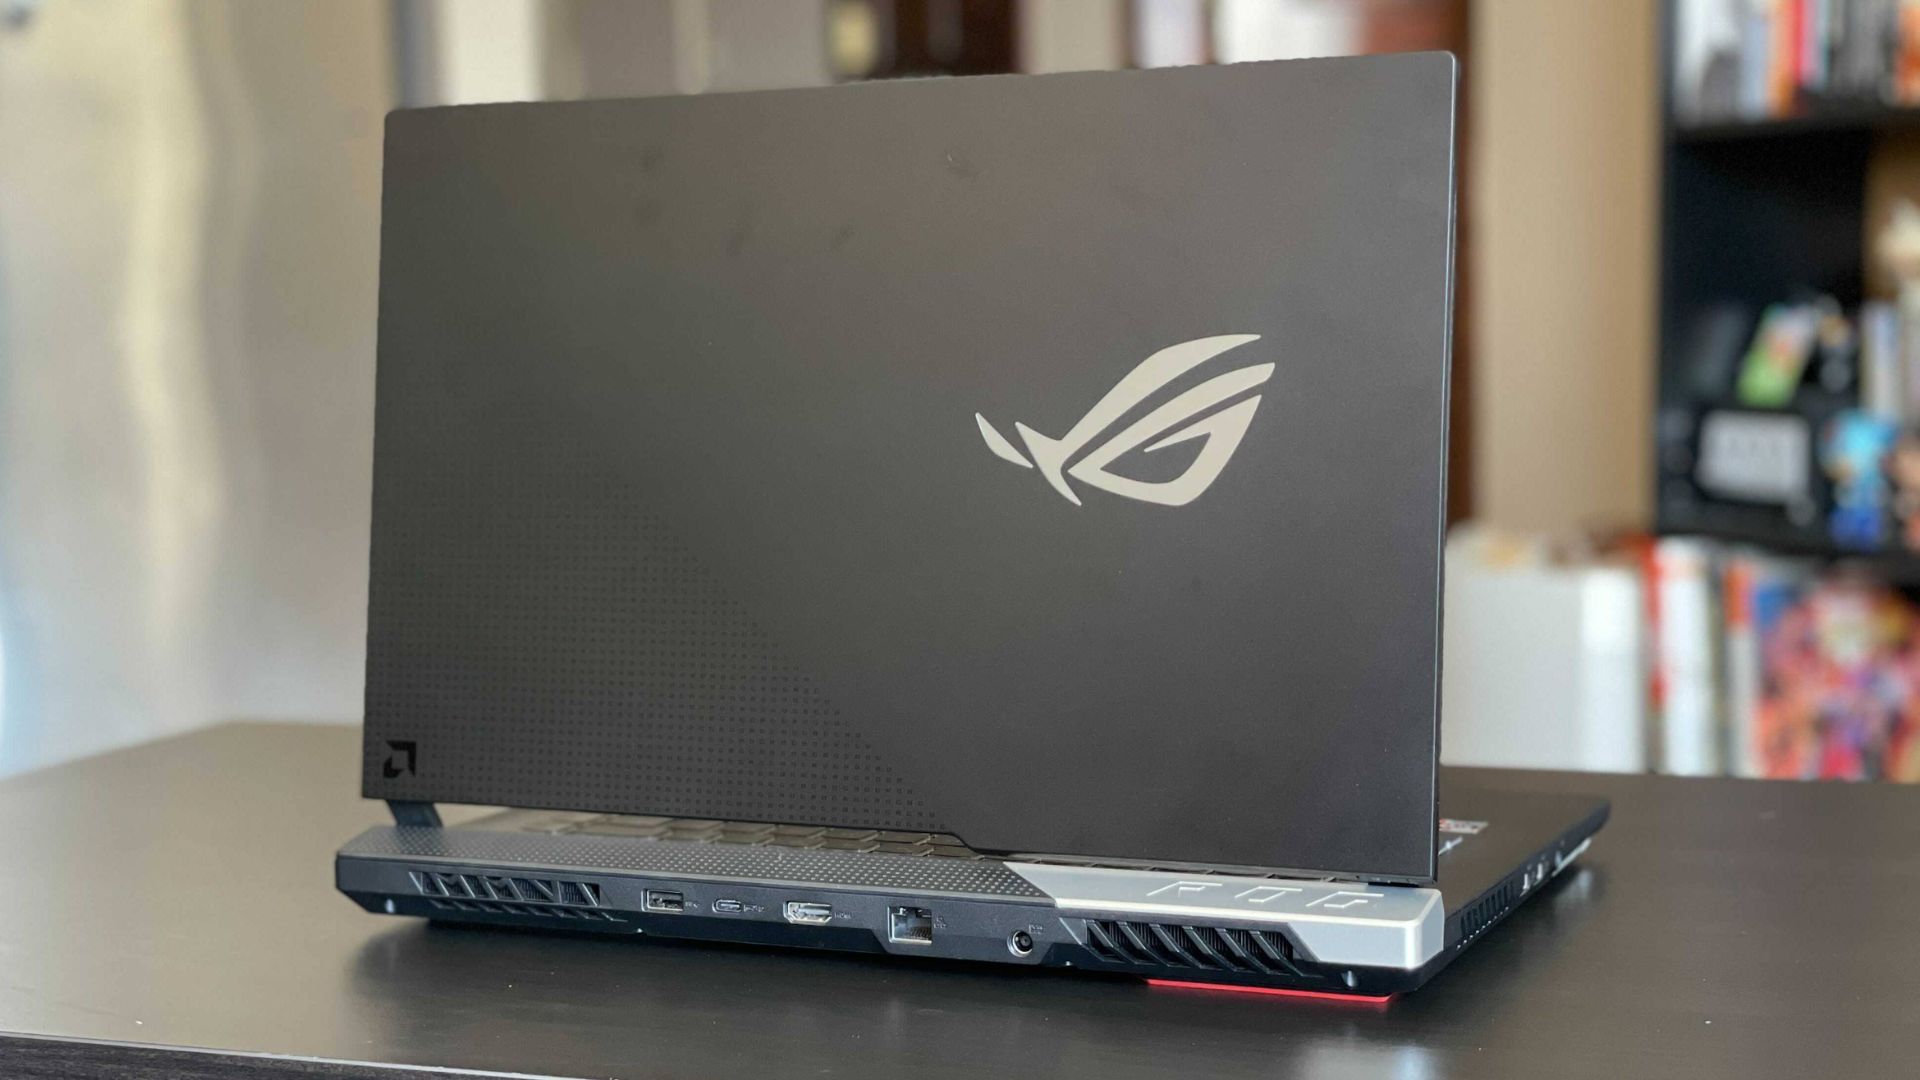 What Are The Best Aspects Of A Gaming Laptop